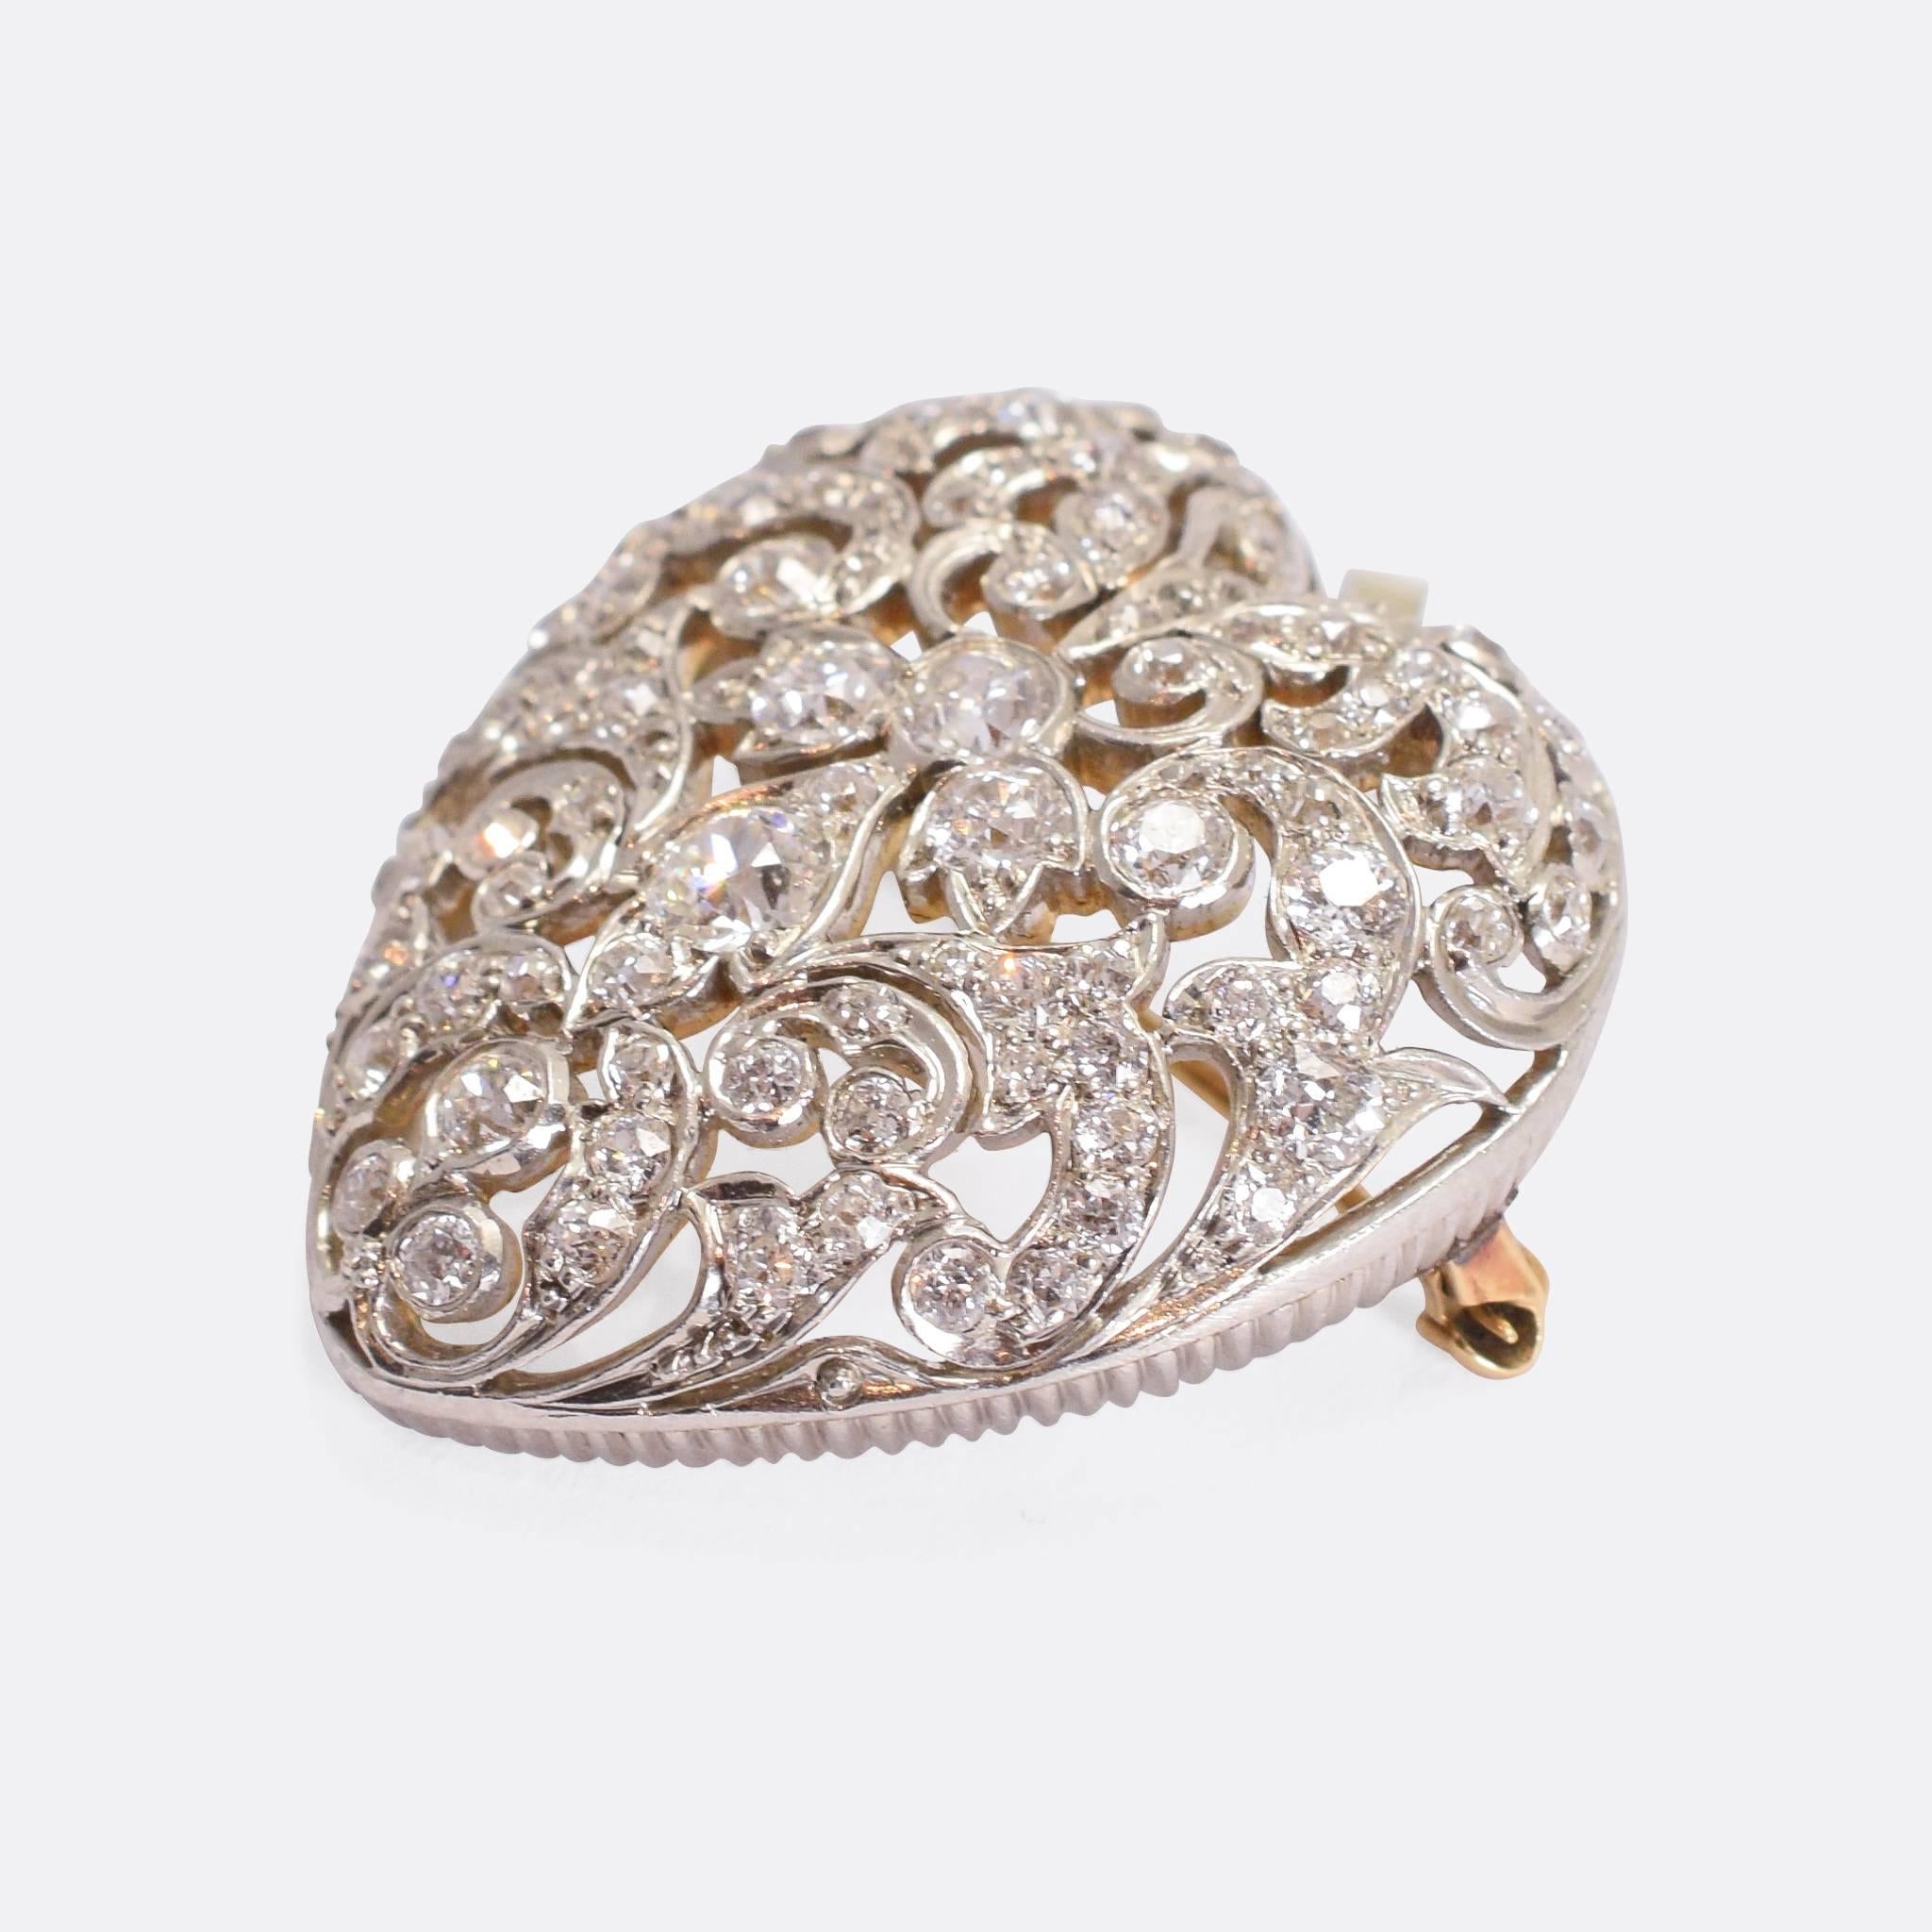 A stunning antique openworked heart, fully set with old cut diamonds. The craftsmanship is exquisite, modelled in platinum with 18k gold back, it dates to c.1910. The piece features a bail for wear as a pendant, and also brooch fittings. Set with